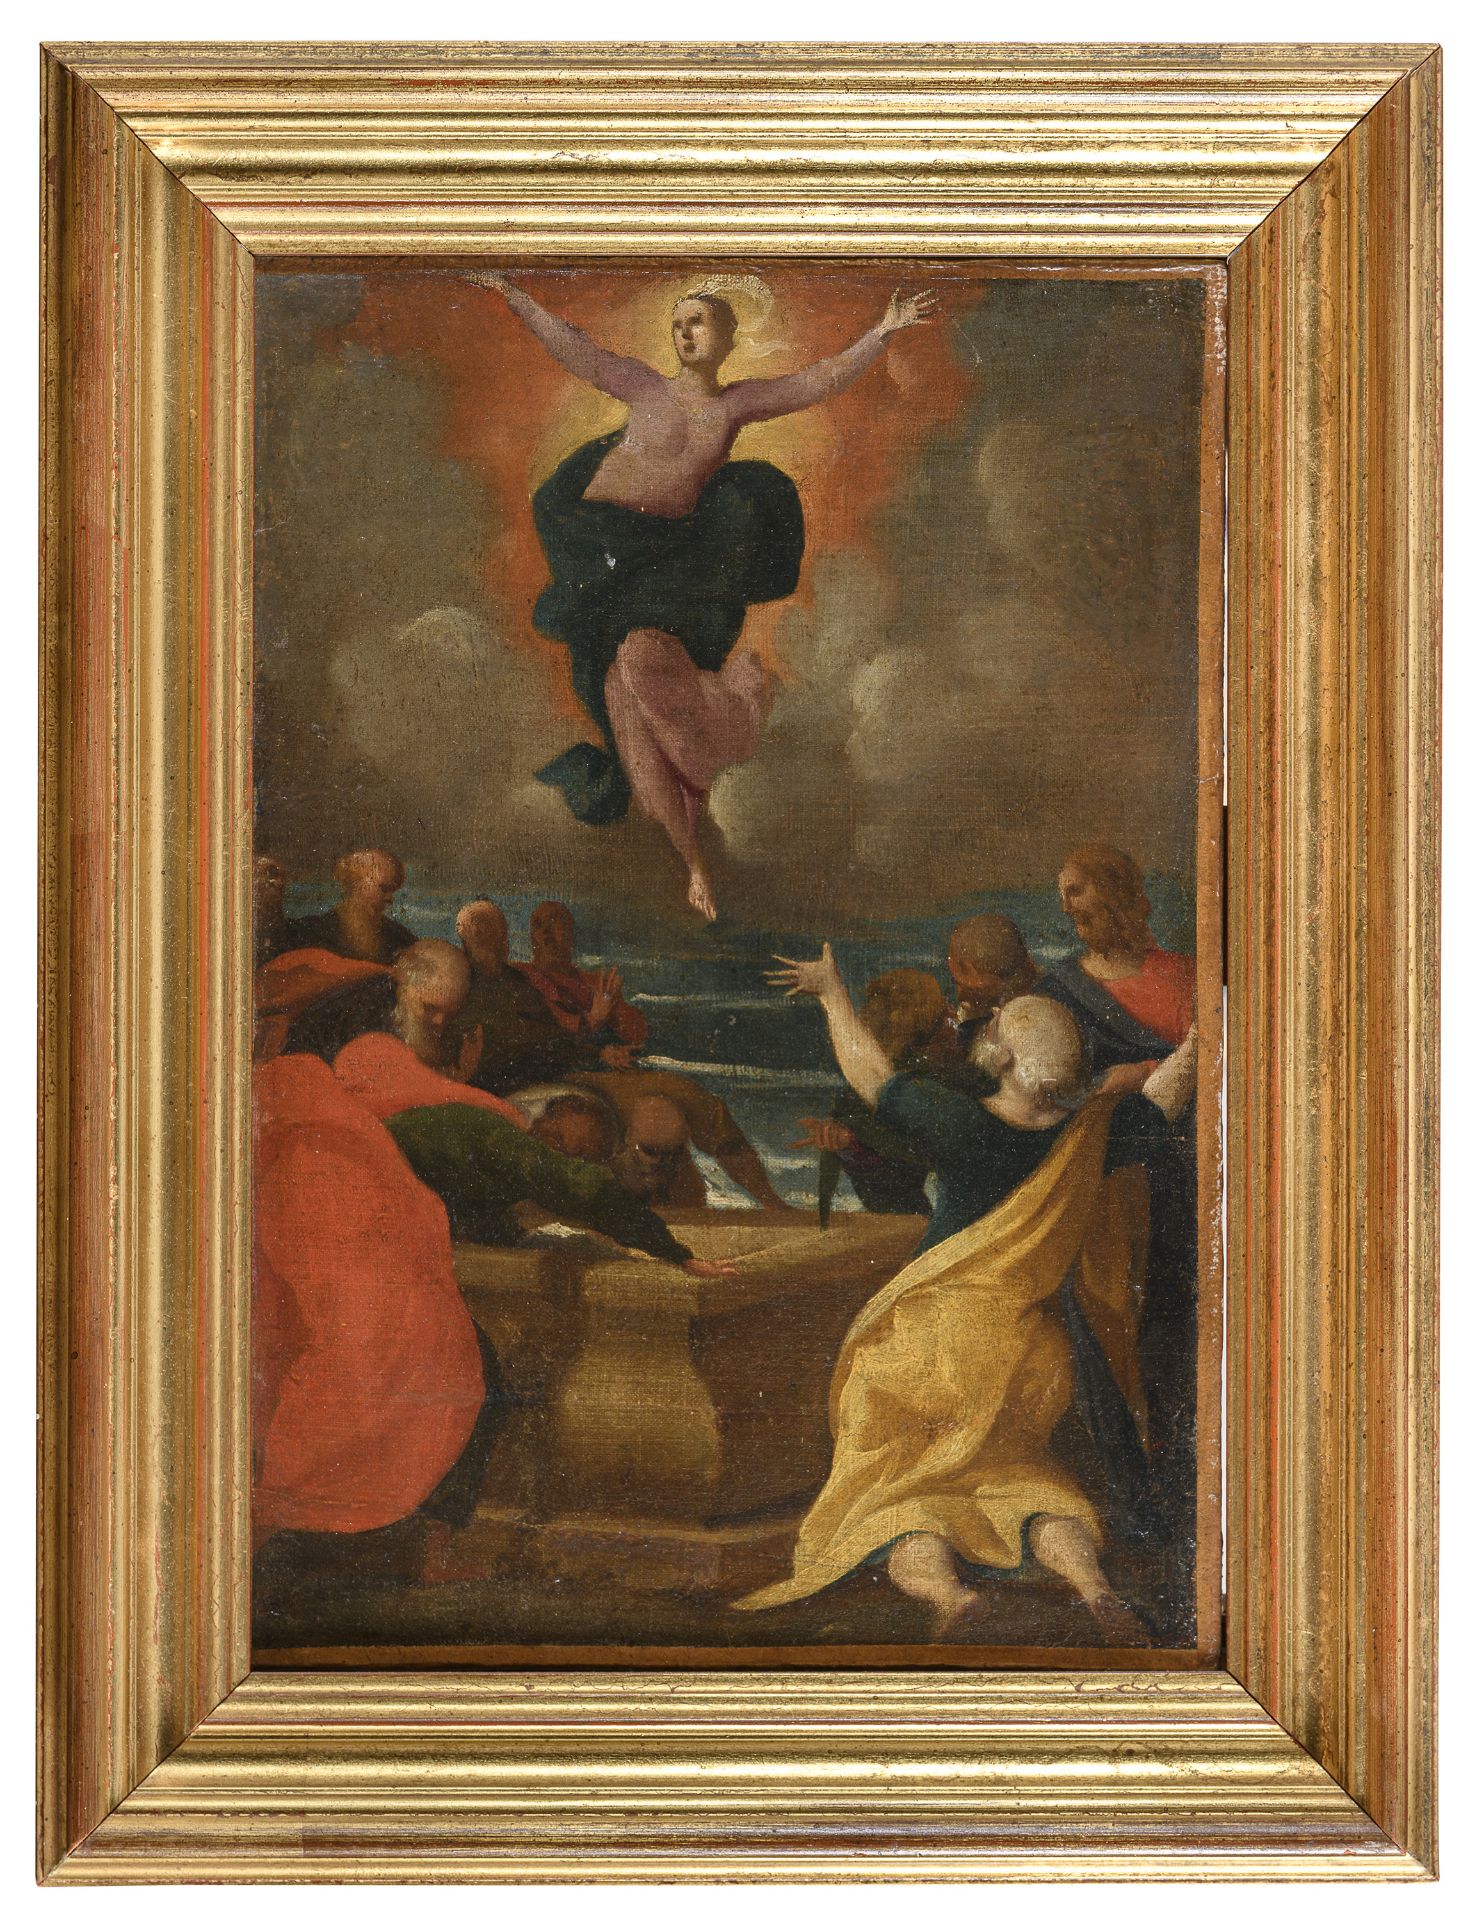 FERRARESE OIL PAINTING EARLY 17TH CENTURY